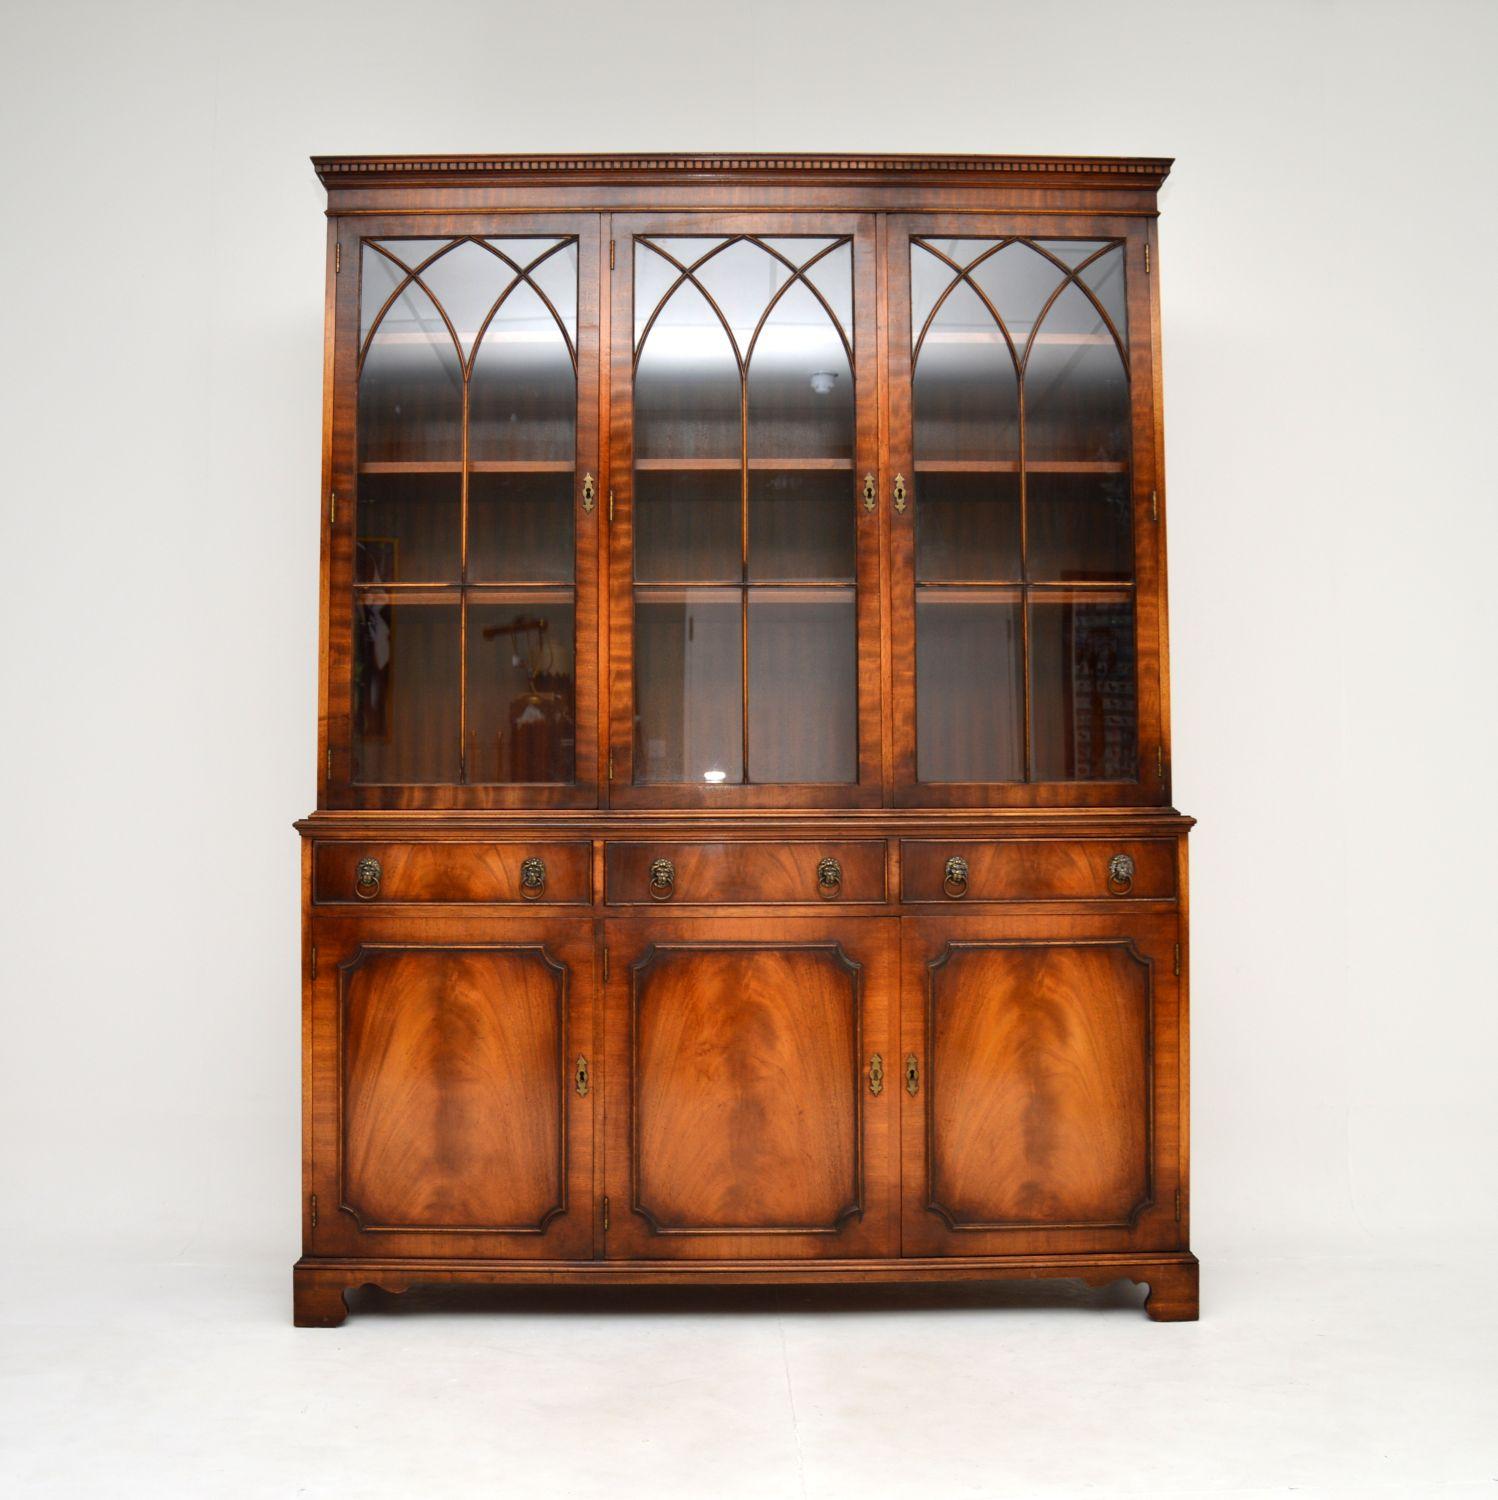 A handsome and top quality large antique Georgian style bookcase. This dates from around the 1950’s.

It is beautifully made, with gorgeous veneers. There is a sweeping astral glaze design on the glass door fronts, the moulded top cornice is finely